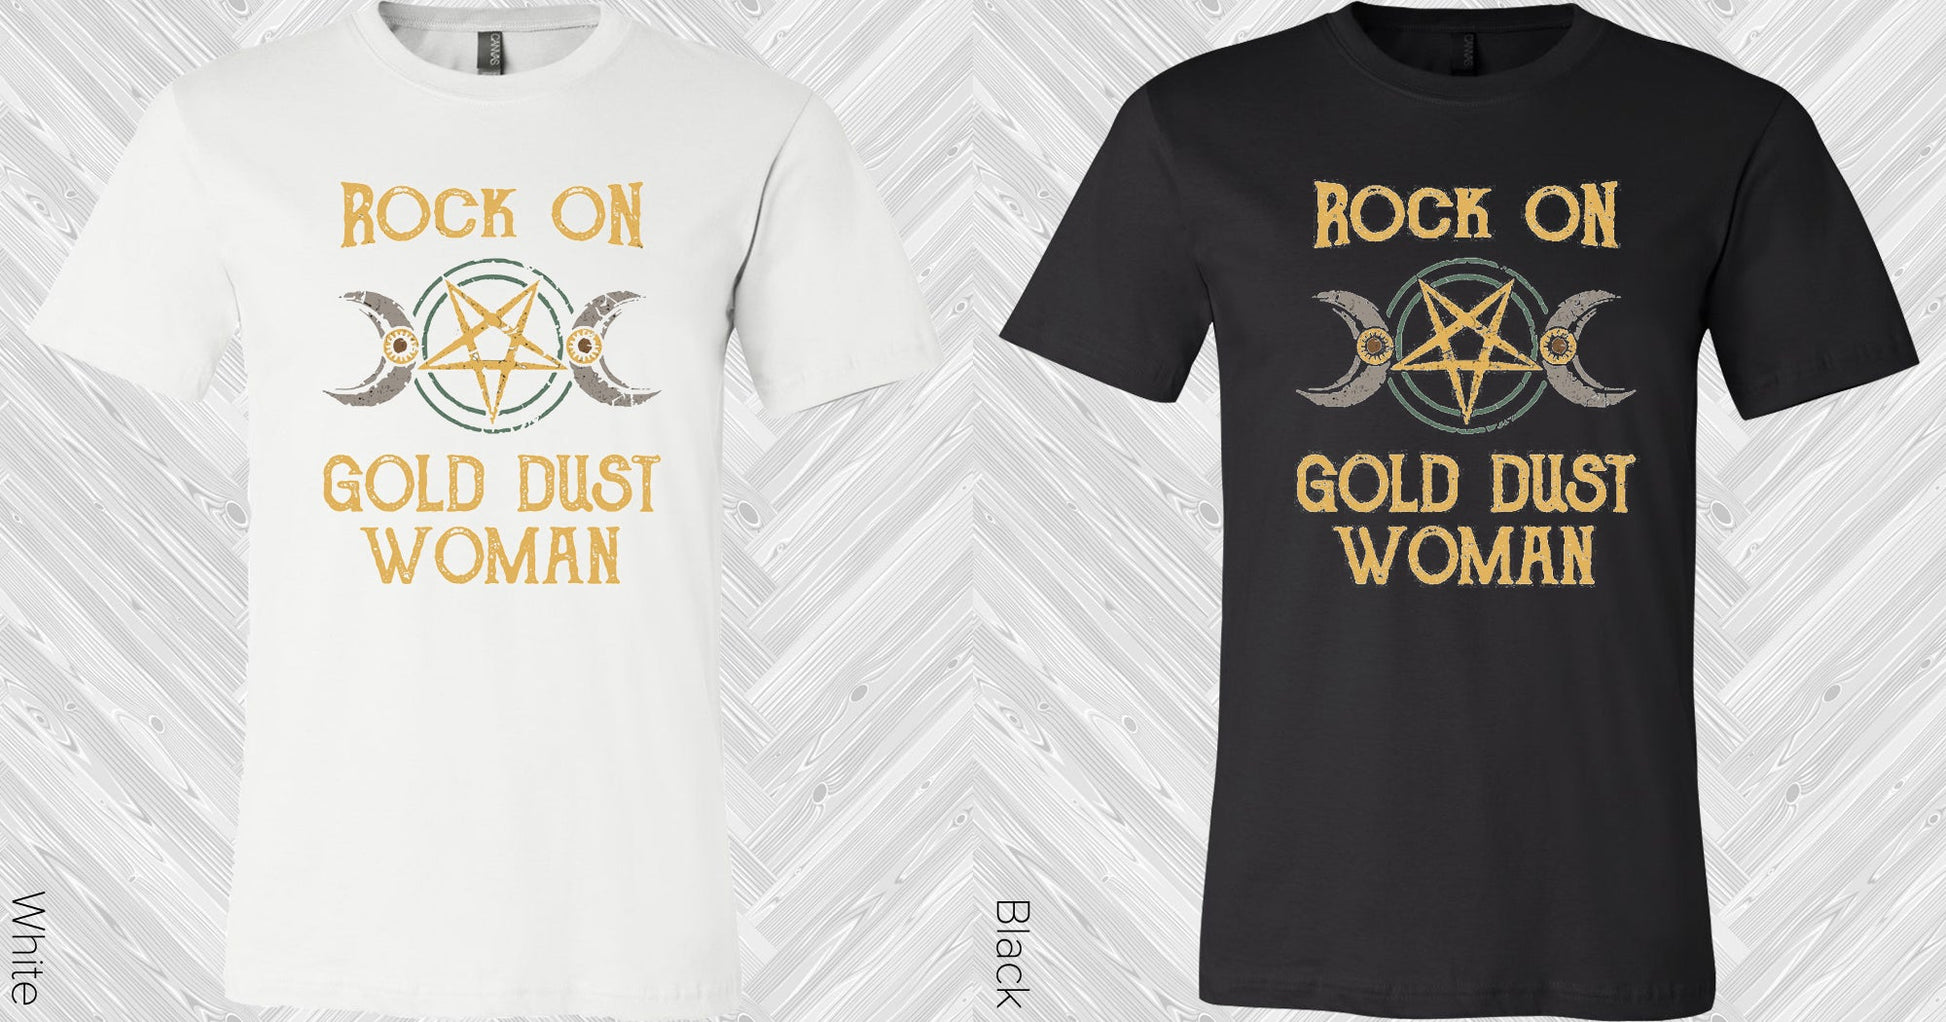 Rock On Gold Dust Woman Graphic Tee Graphic Tee